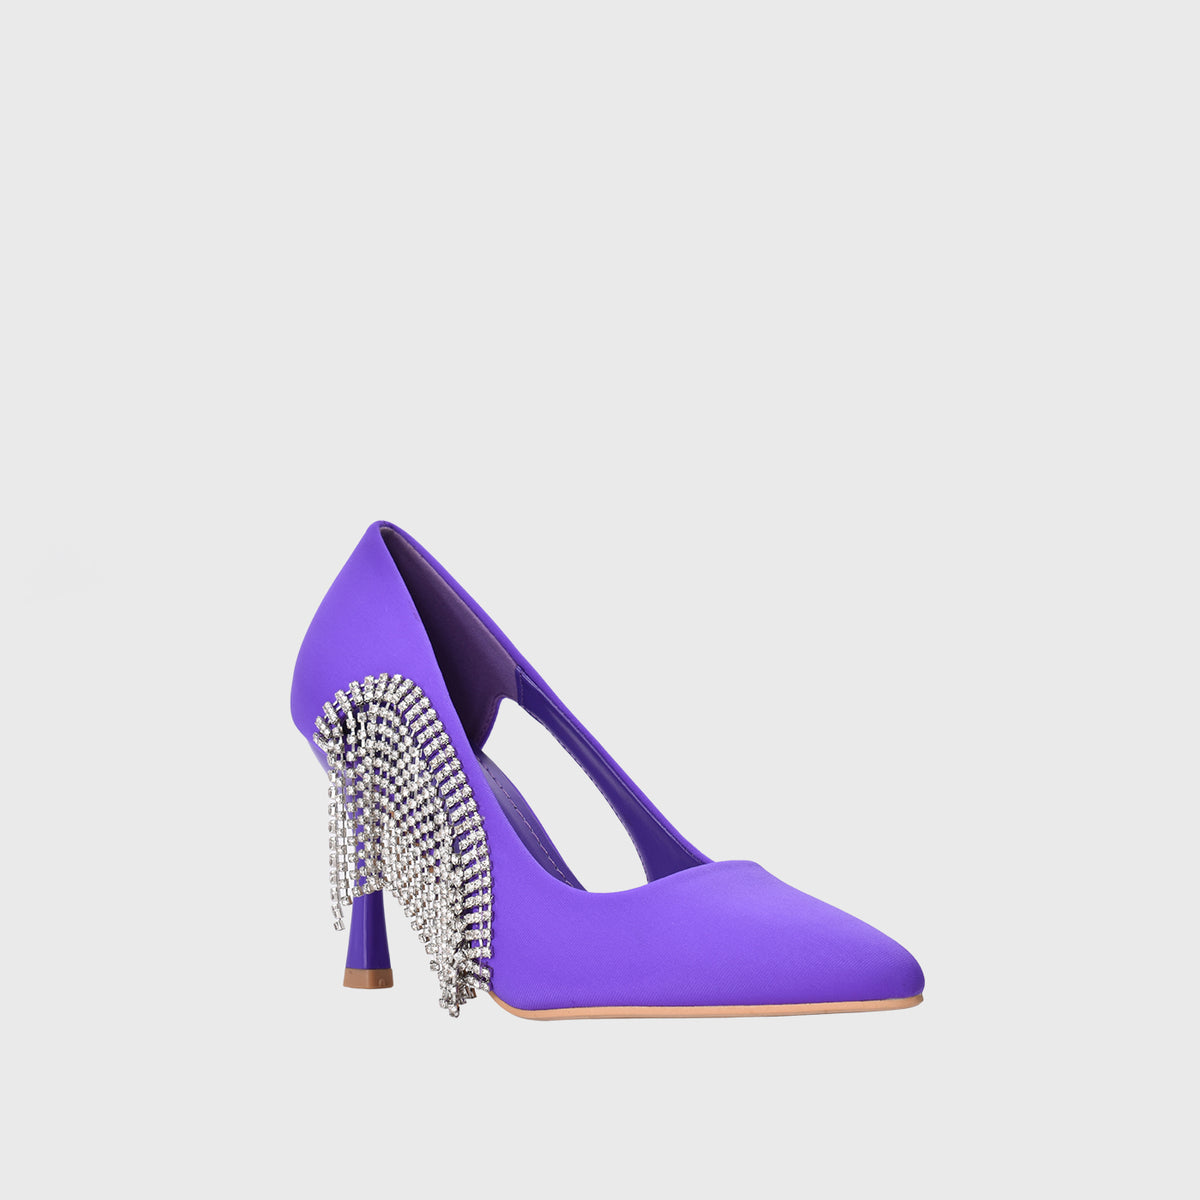 Purple high heel shoes with a chain